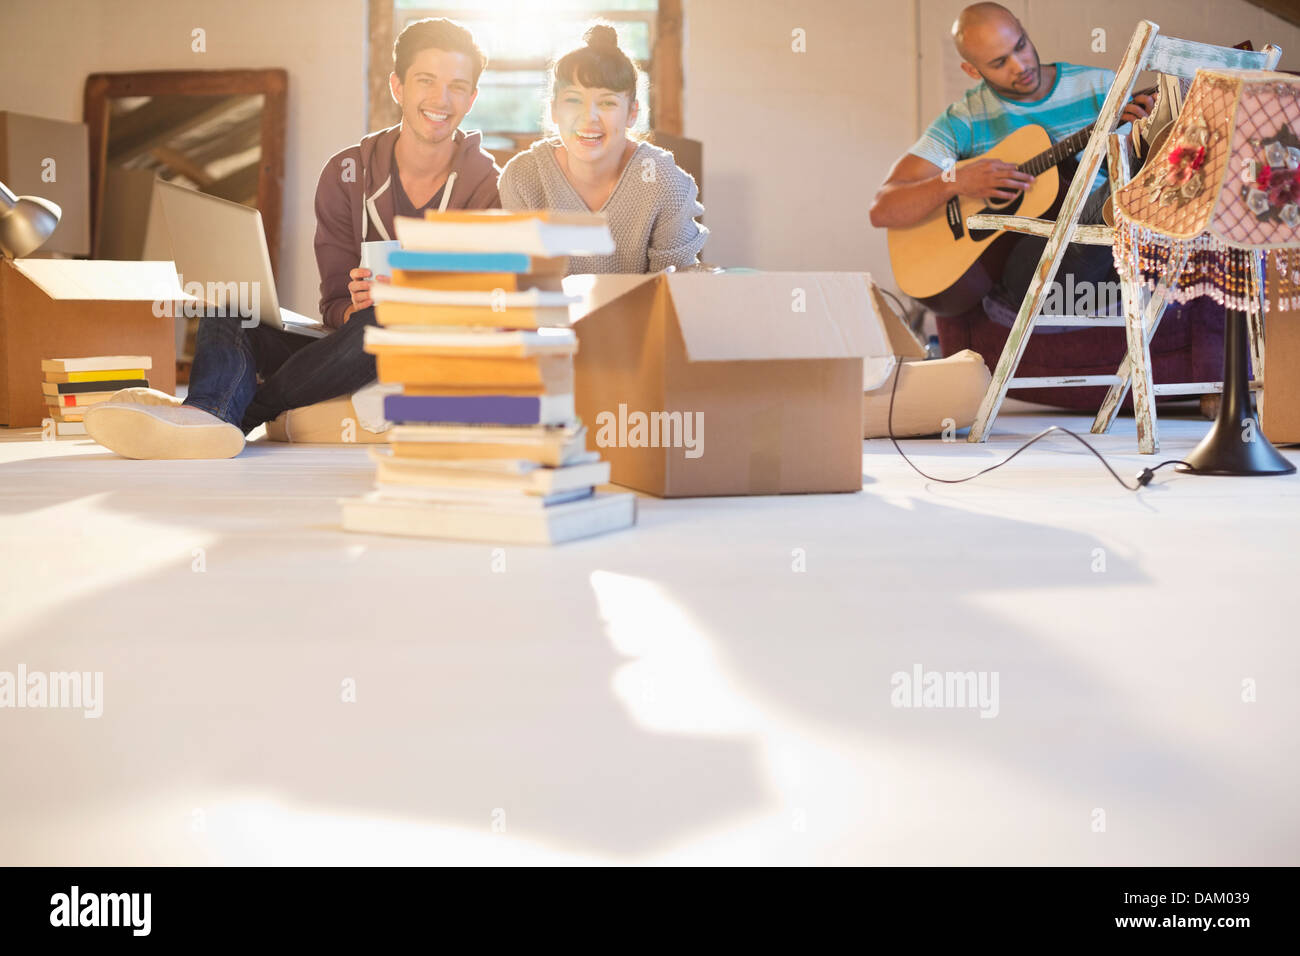 Friends relaxing together in new attic Stock Photo